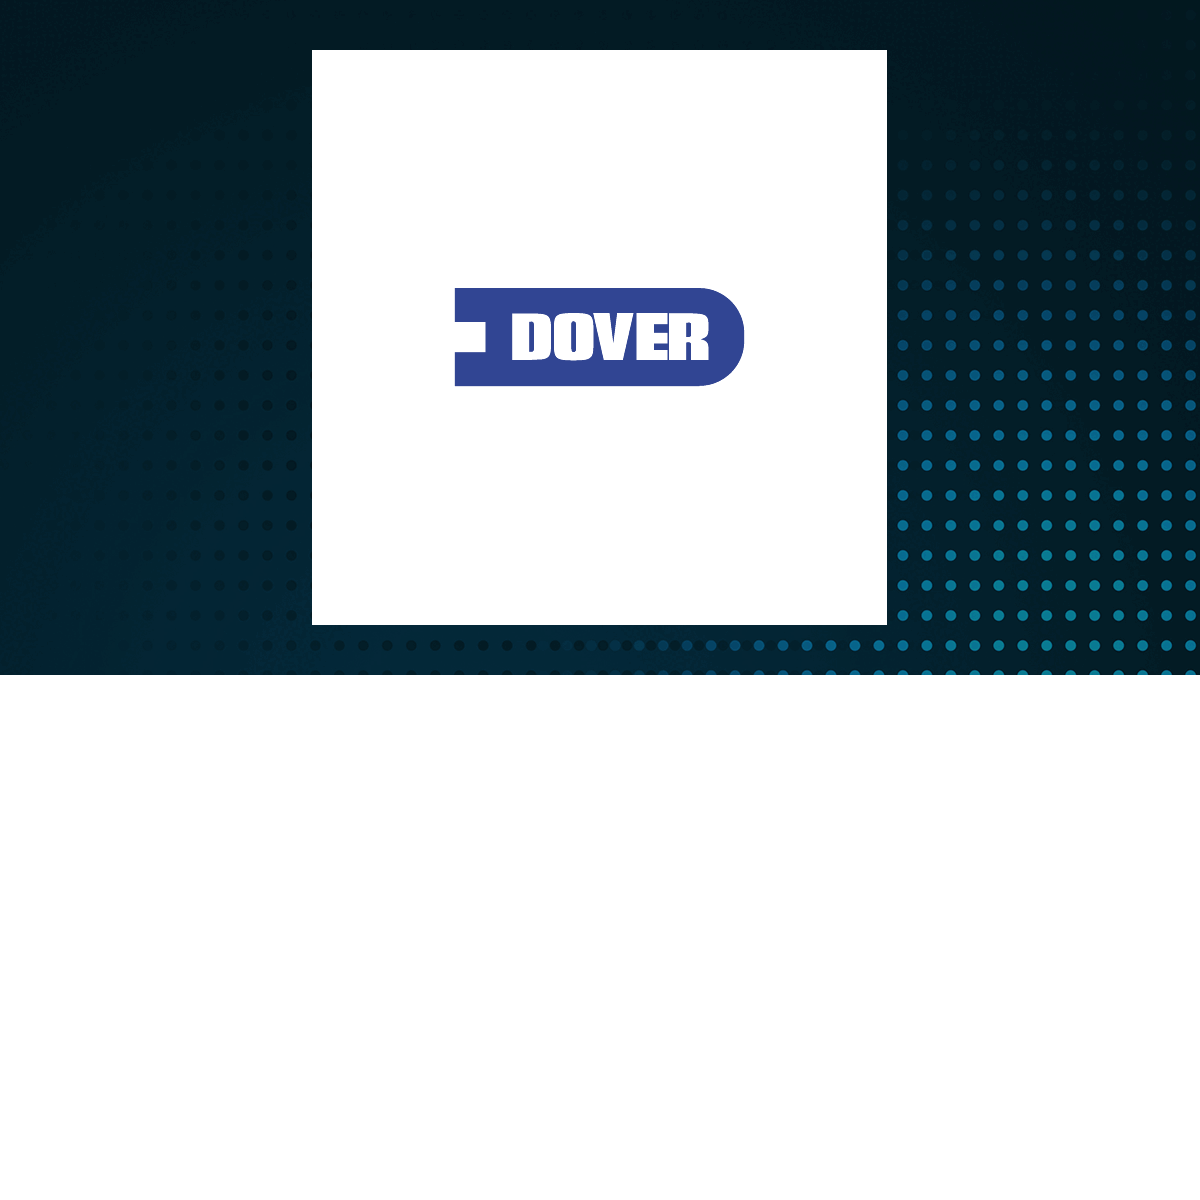 Dover logo with Industrial Products background